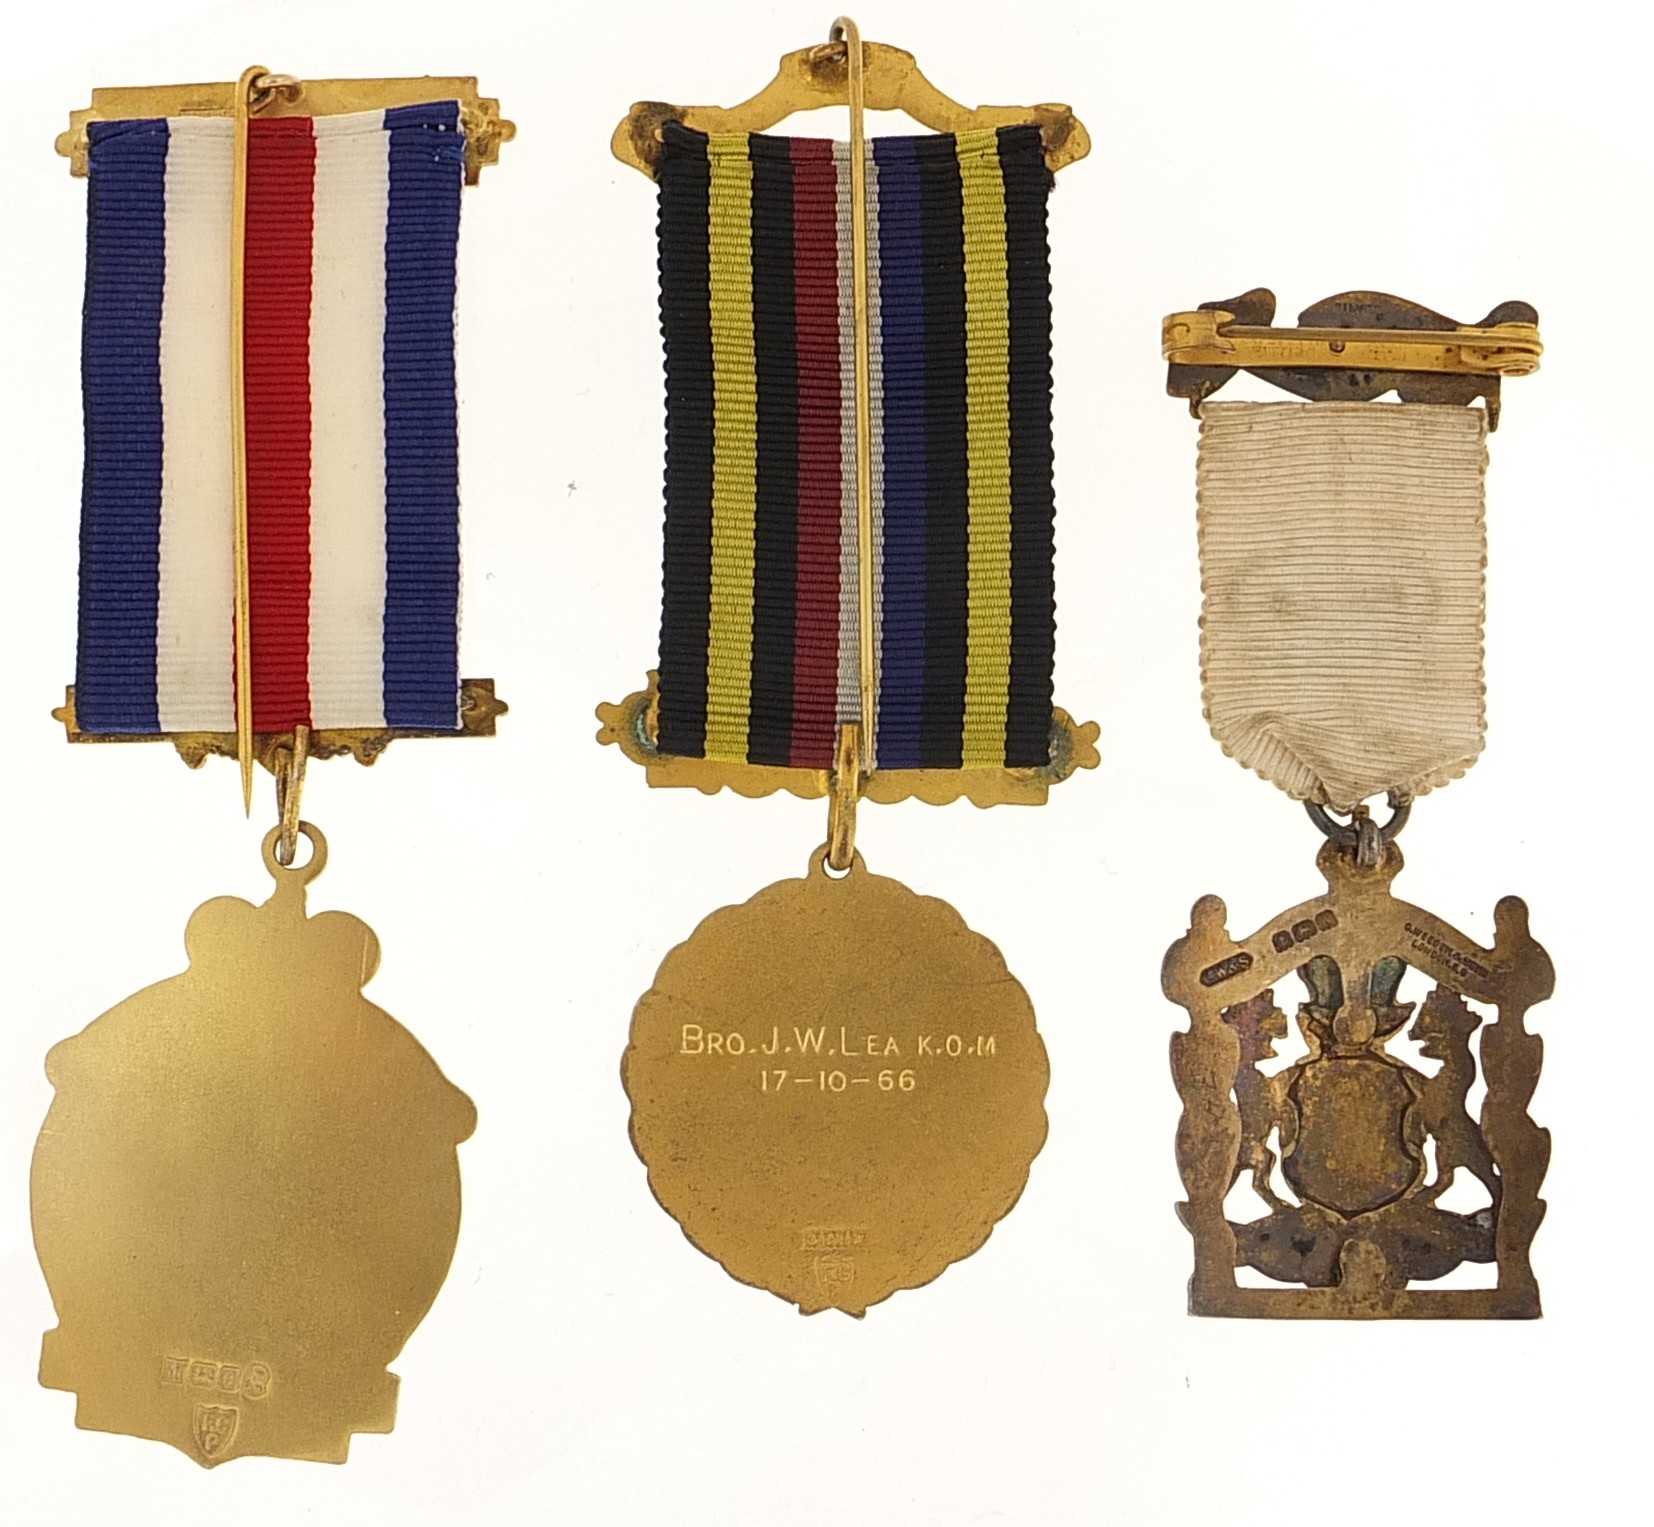 Two silver gilt and enamel RAOB jewels and a silver gilt and enamel Royal Masonic Institution for - Image 3 of 4